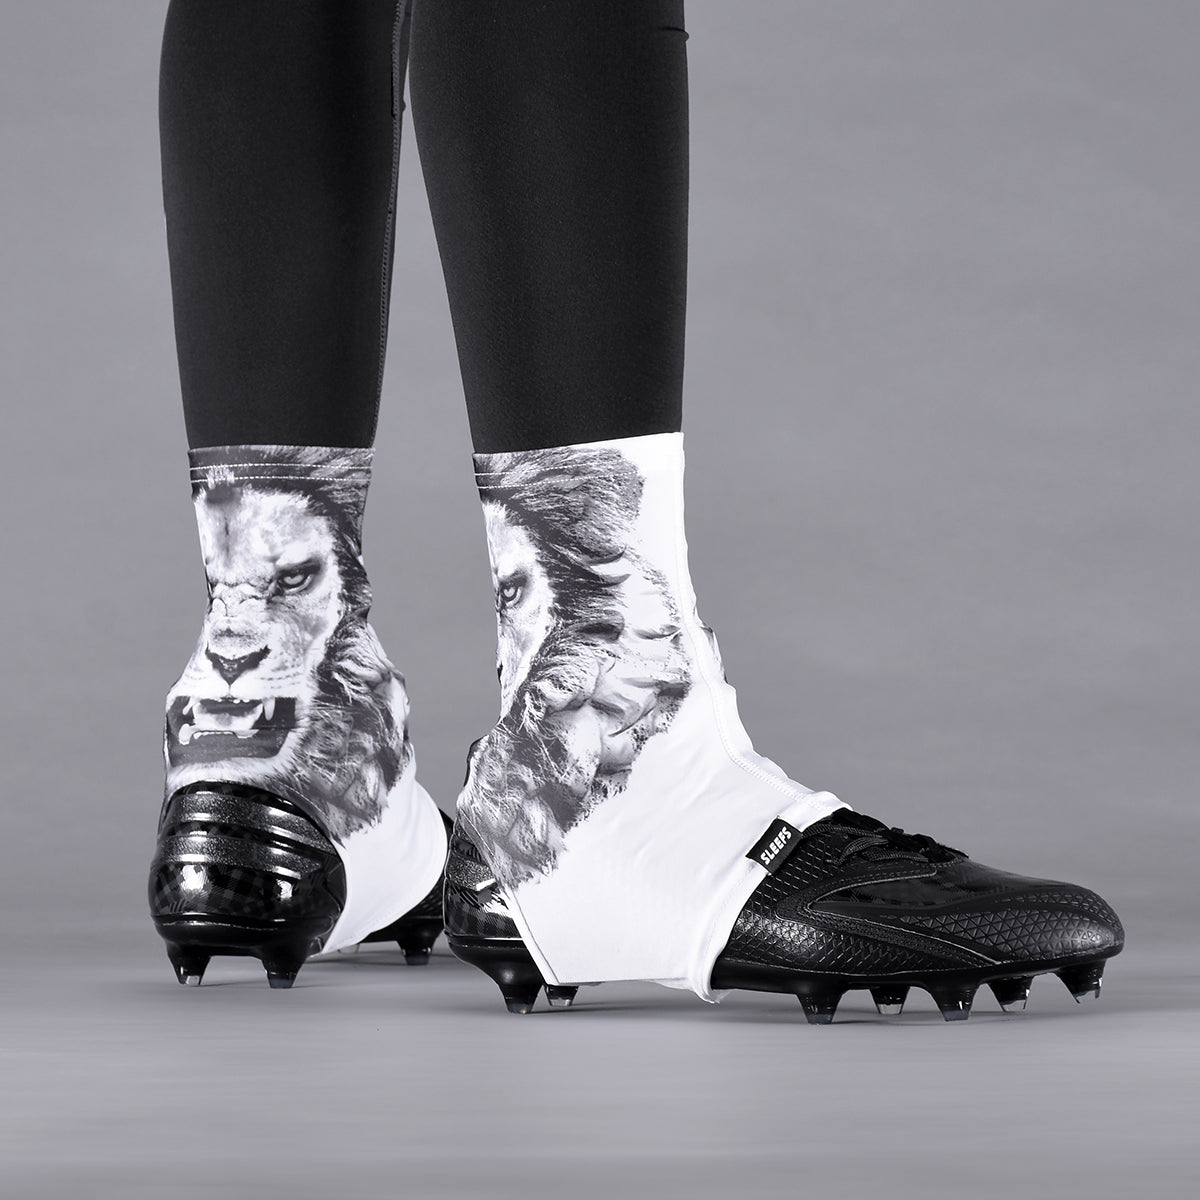 White Lion Roar Spats / Cleat Covers